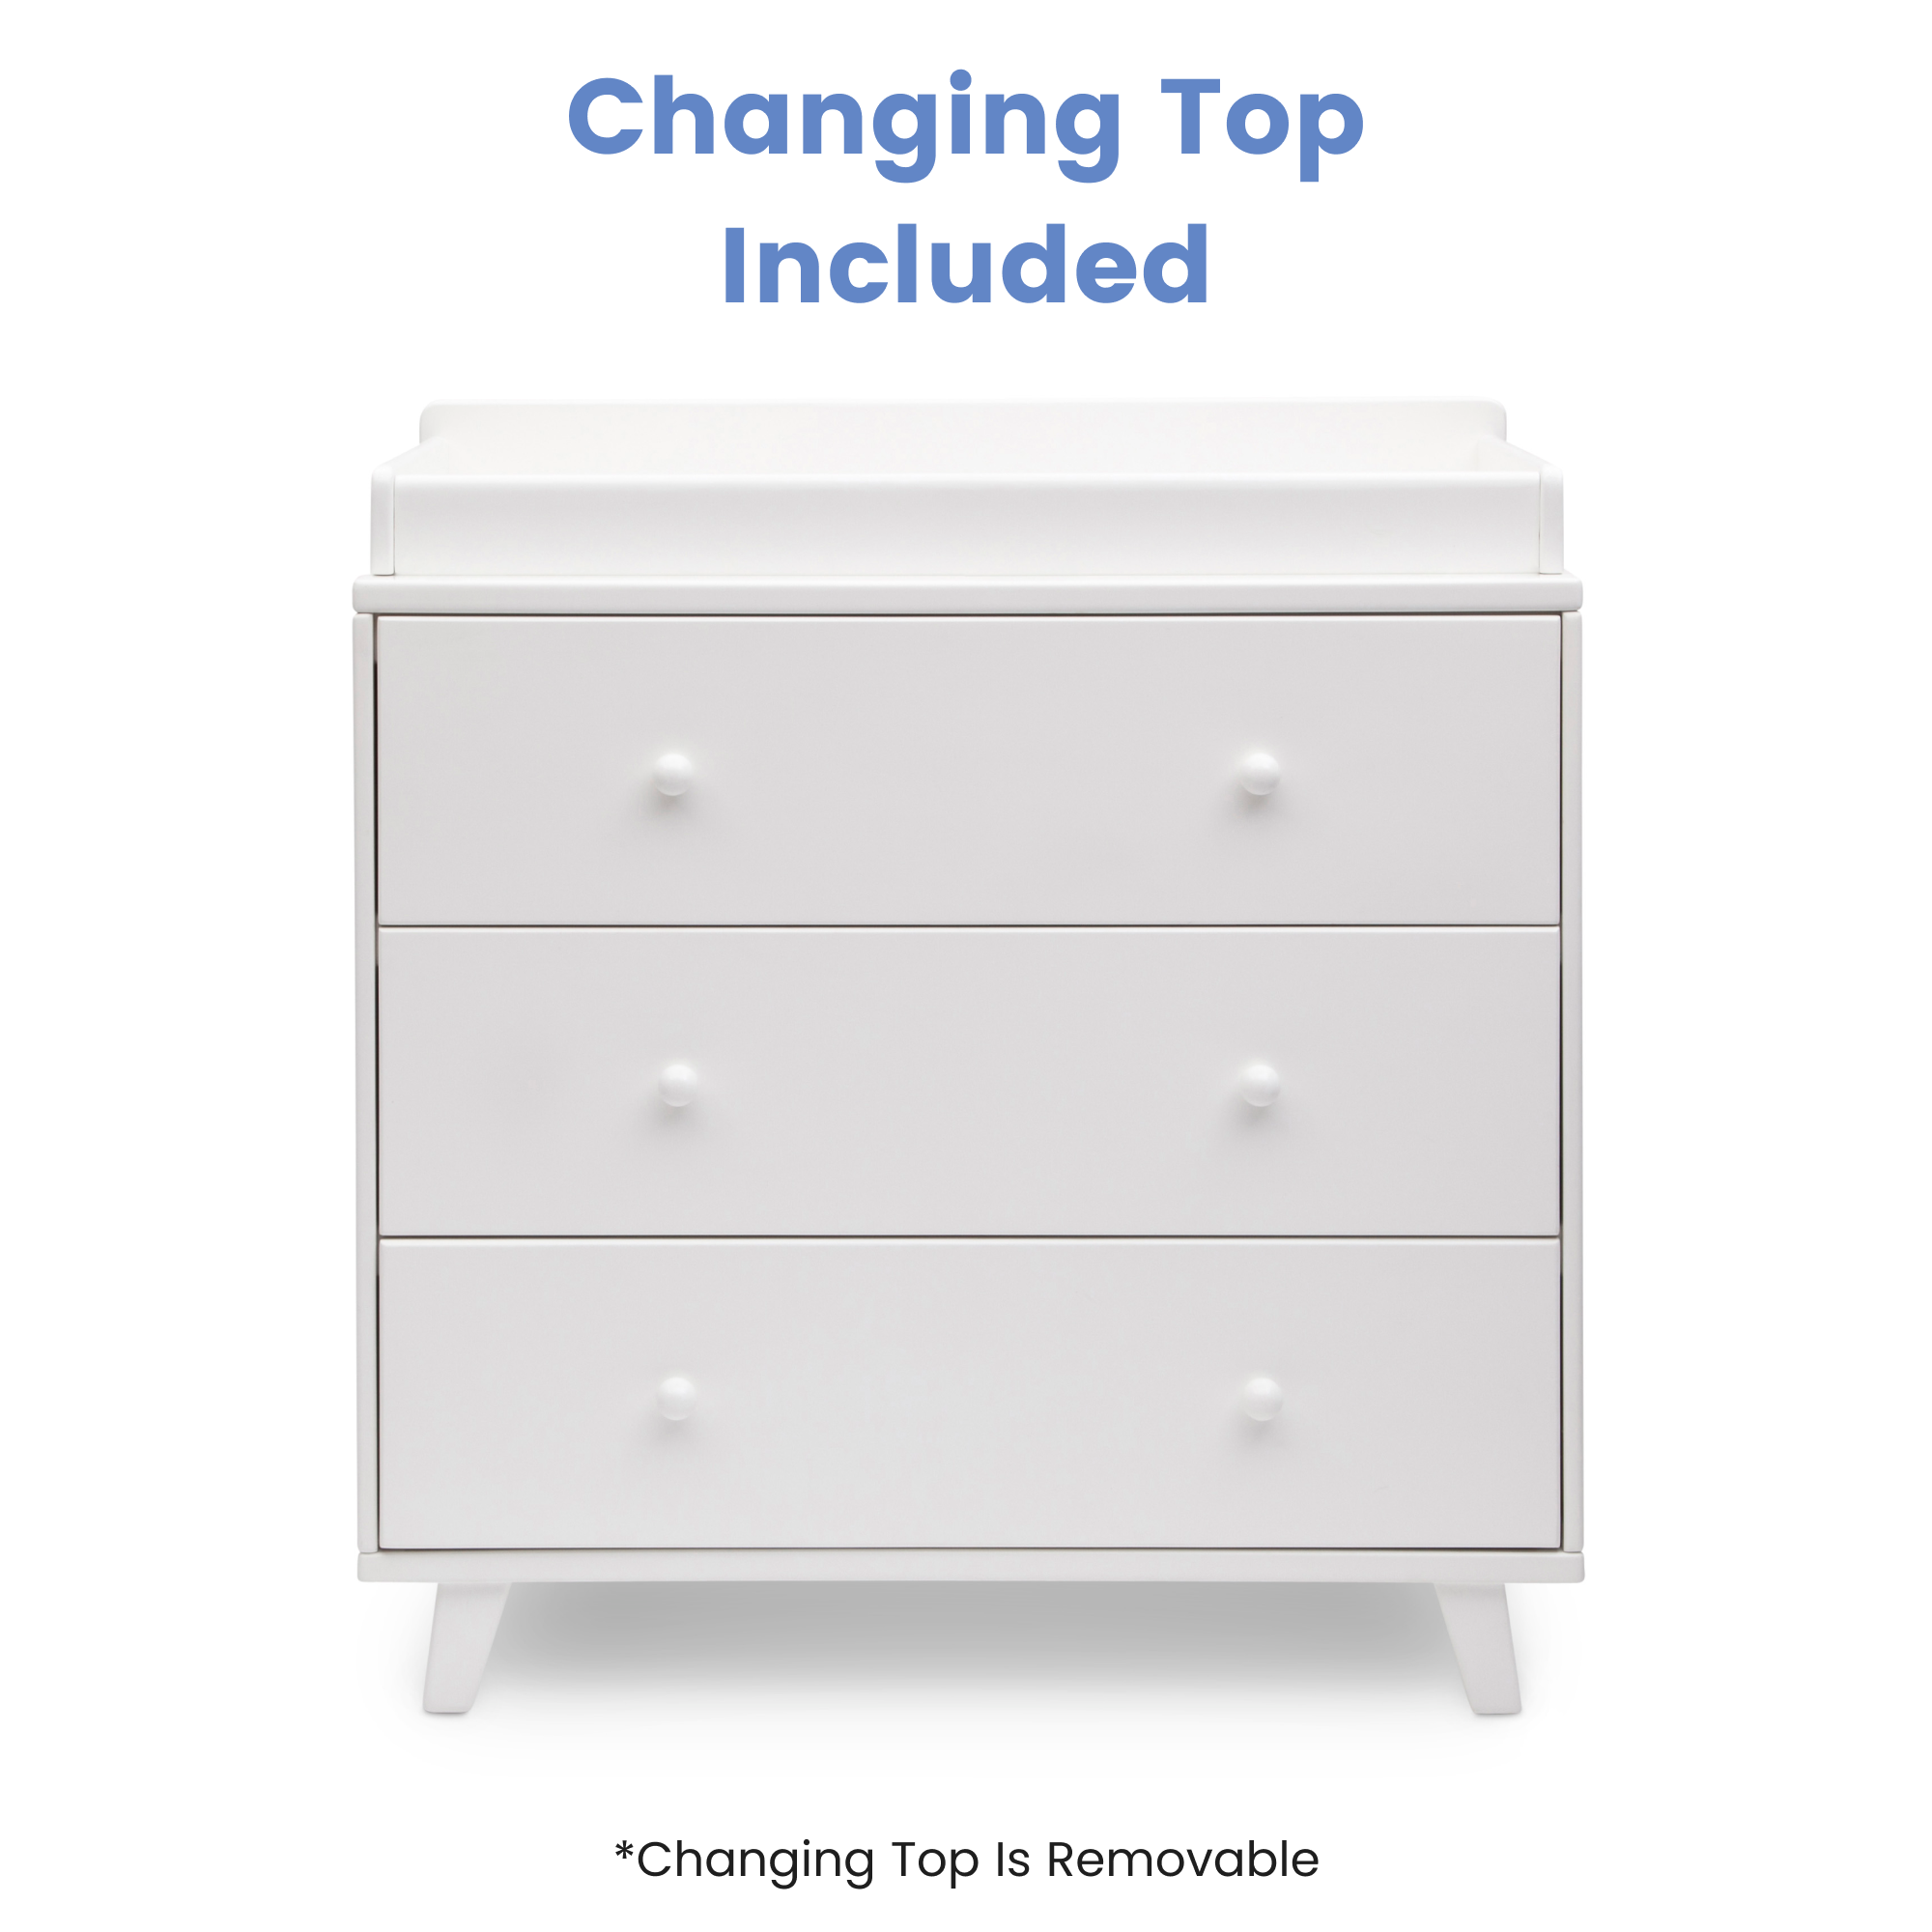 Delta Children Ava 3 Drawer Dresser with Changing Top, Greenguard Gold Certified, White - image 5 of 12